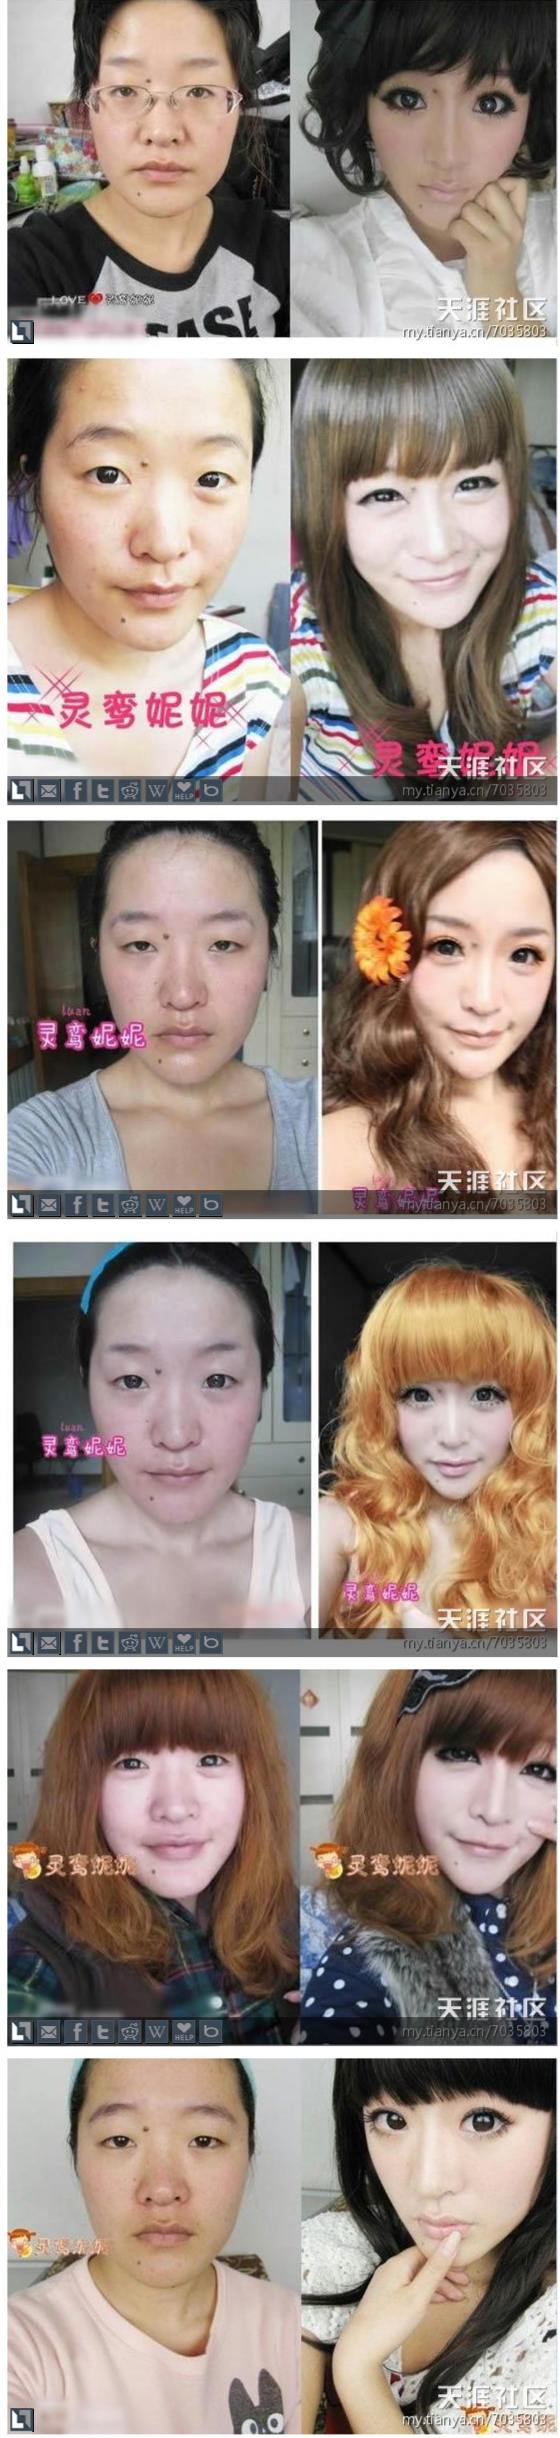 [Image: chinese_girl_after_makeup_2.jpg]